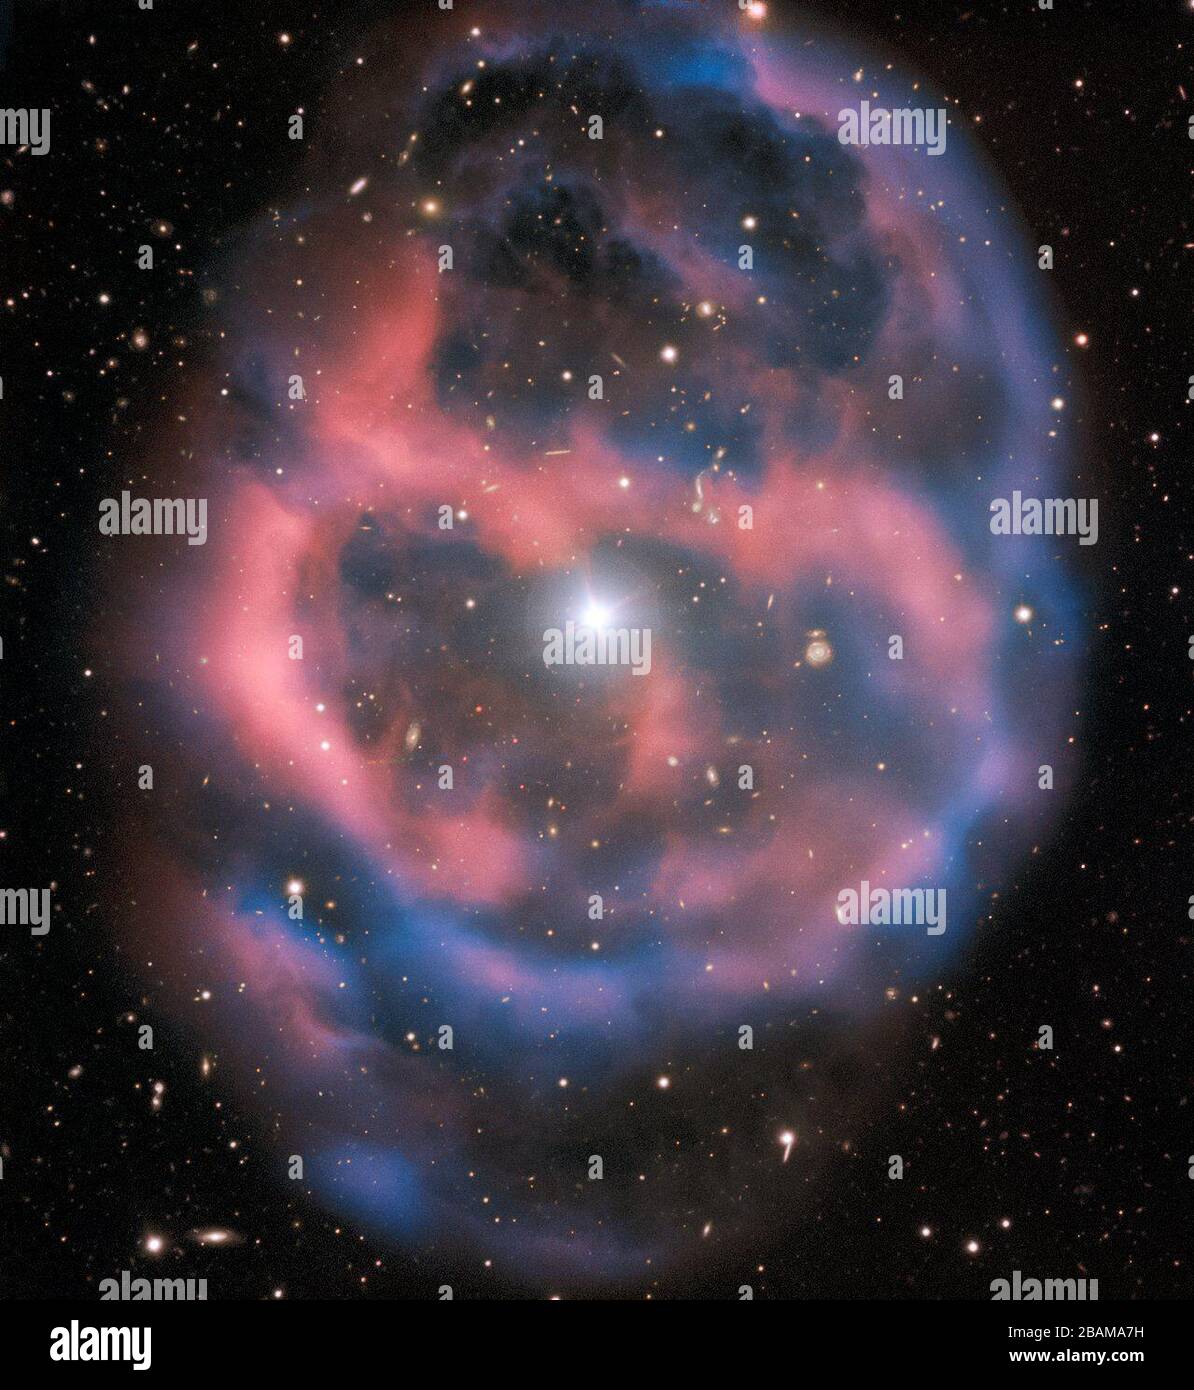 'English: The faint, ephemeral glow emanating from the planetary nebula ESO 577-24 persists for only a short time  — around 10,000 years, a blink of an eye in astronomical terms. ESO’s Very Large Telescope captured this shell of glowing ionised gas — the last breath of the dying star whose simmering remains are visible at the heart of this image. As the gaseous shell of this planetary nebula expands and grows dimmer, it will slowly disappear from sight. This stunning planetary nebula was imaged by one of the VLT’s most versatile instruments, FORS2. The instrument captured the bright, central s Stock Photo